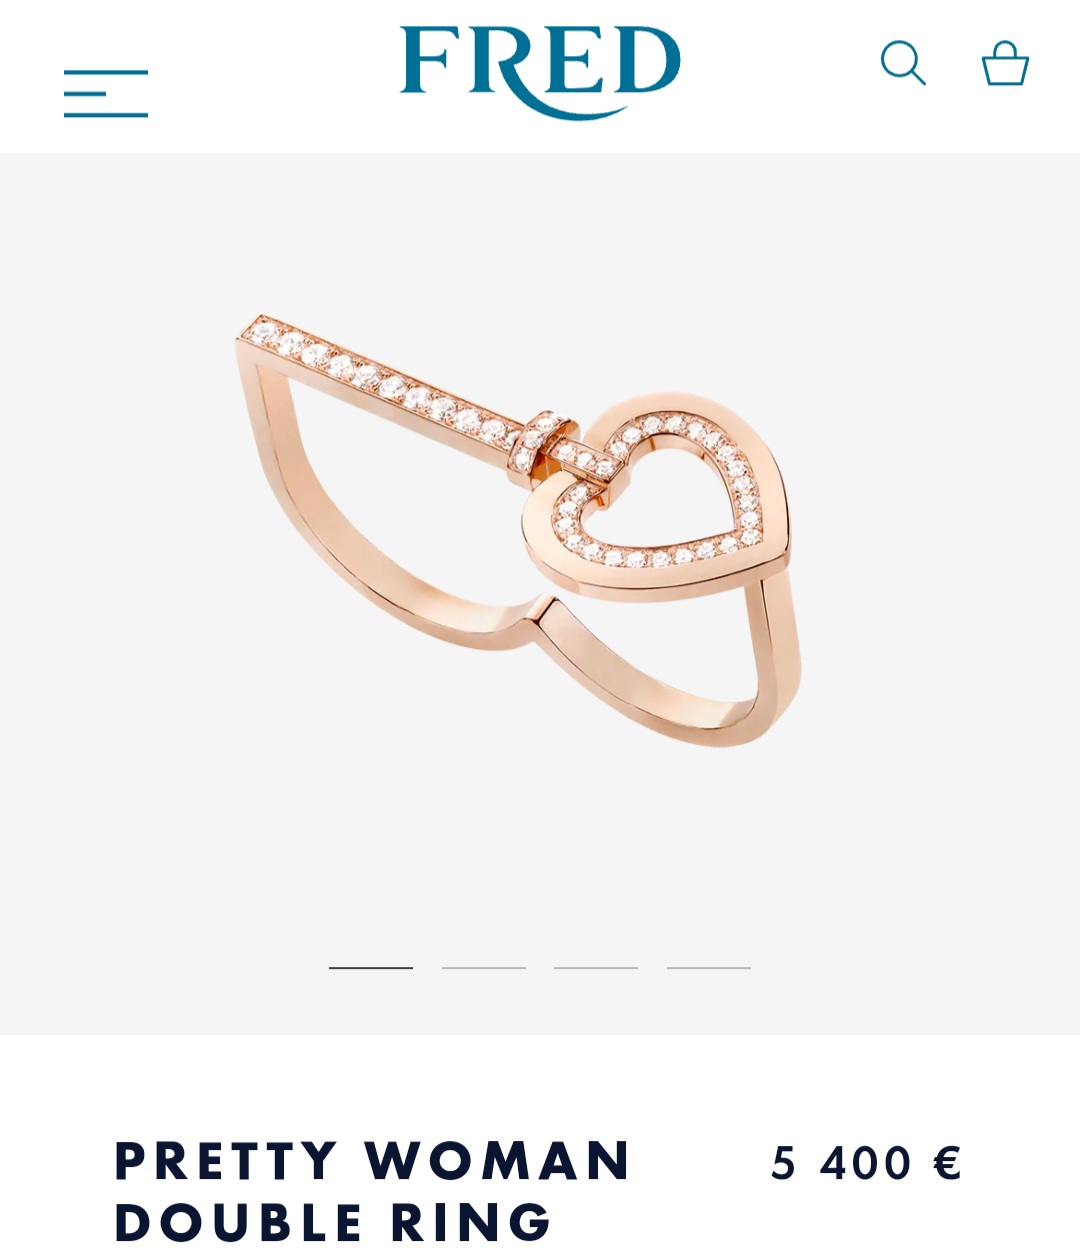 FRED PRETTY WOMAN DOUBLE RING